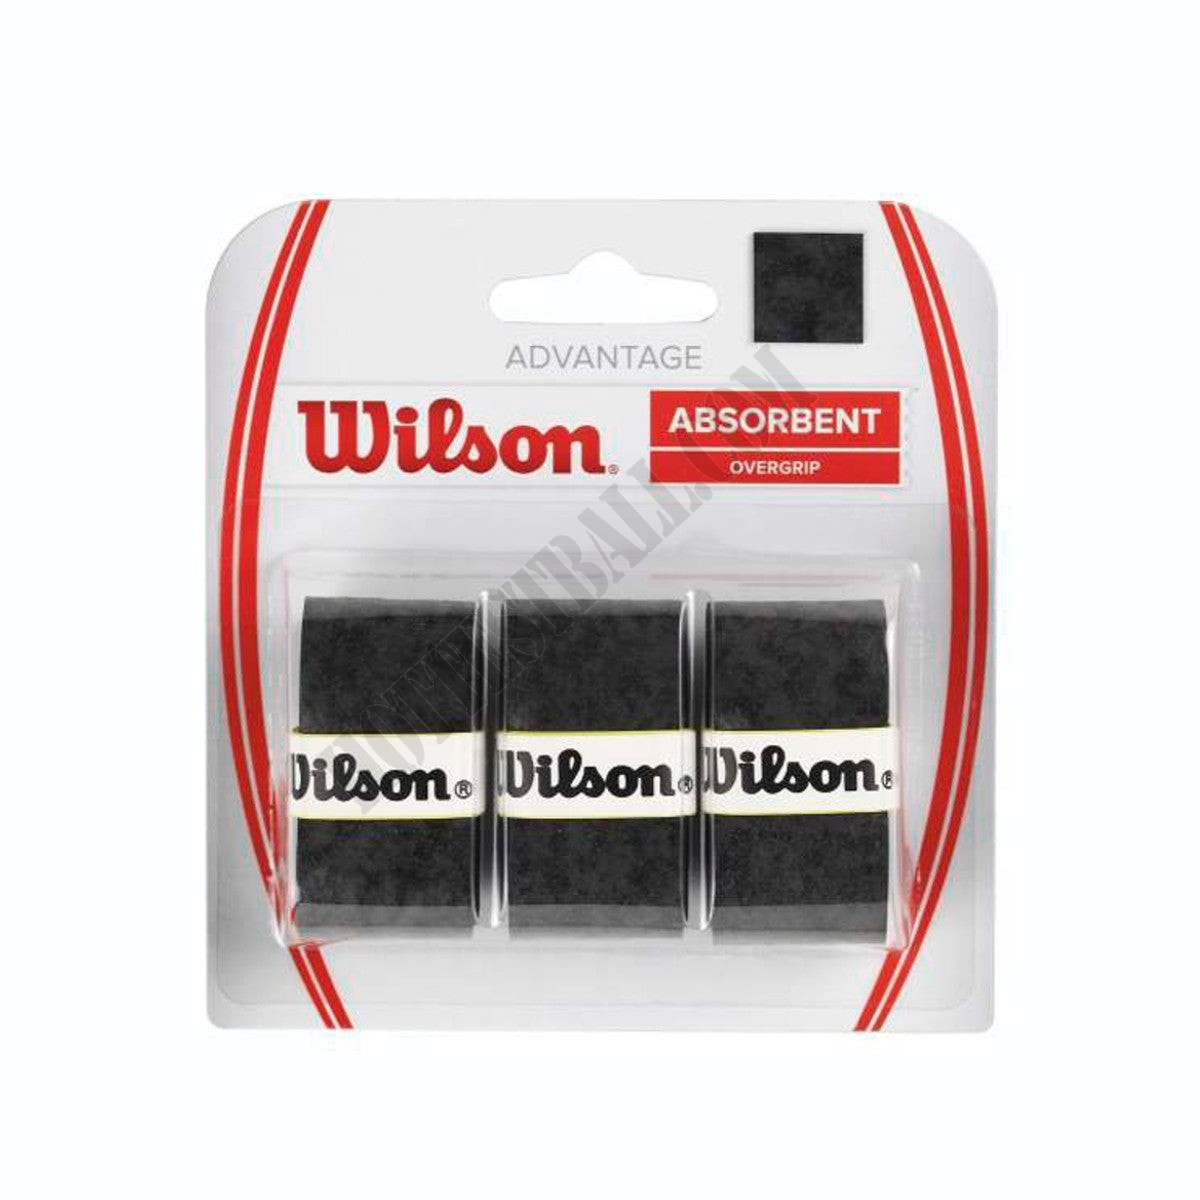 Advantage Overgip, 3 Pack - Wilson Discount Store - -0